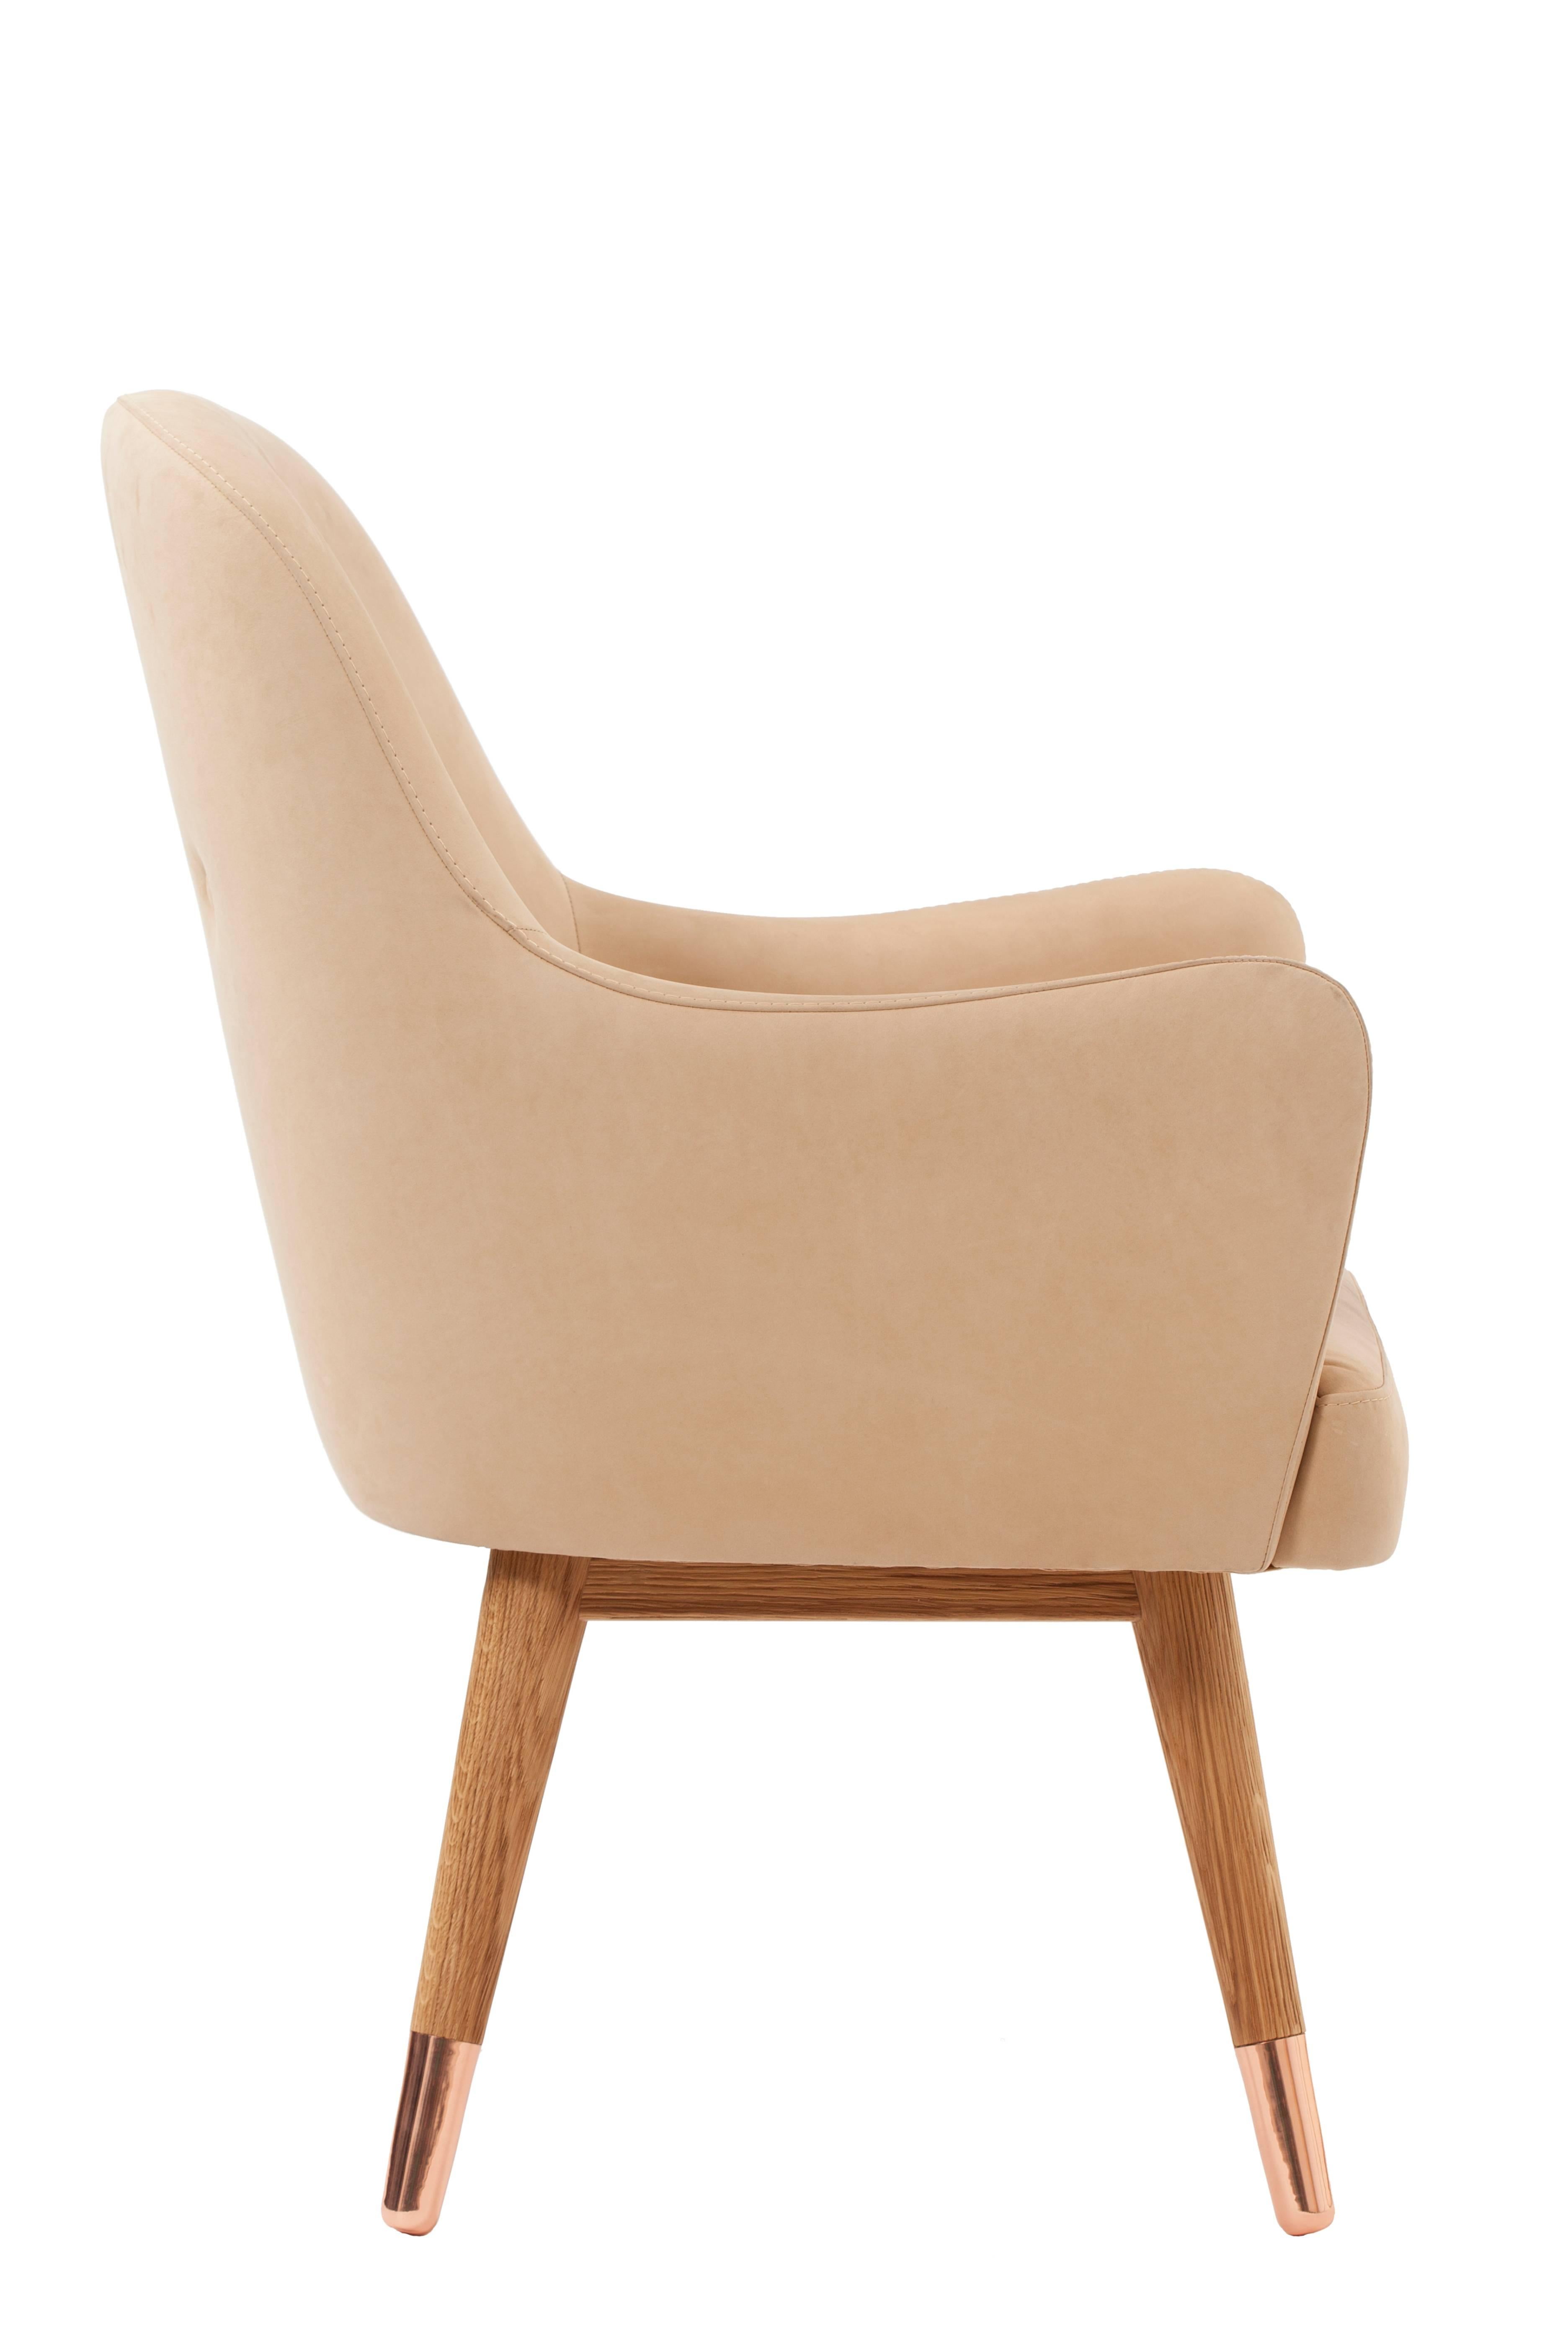 Dandy Chair Armchair in Soft Suede Beige Leather, White Oak and Copper In New Condition For Sale In West Hollywood, CA